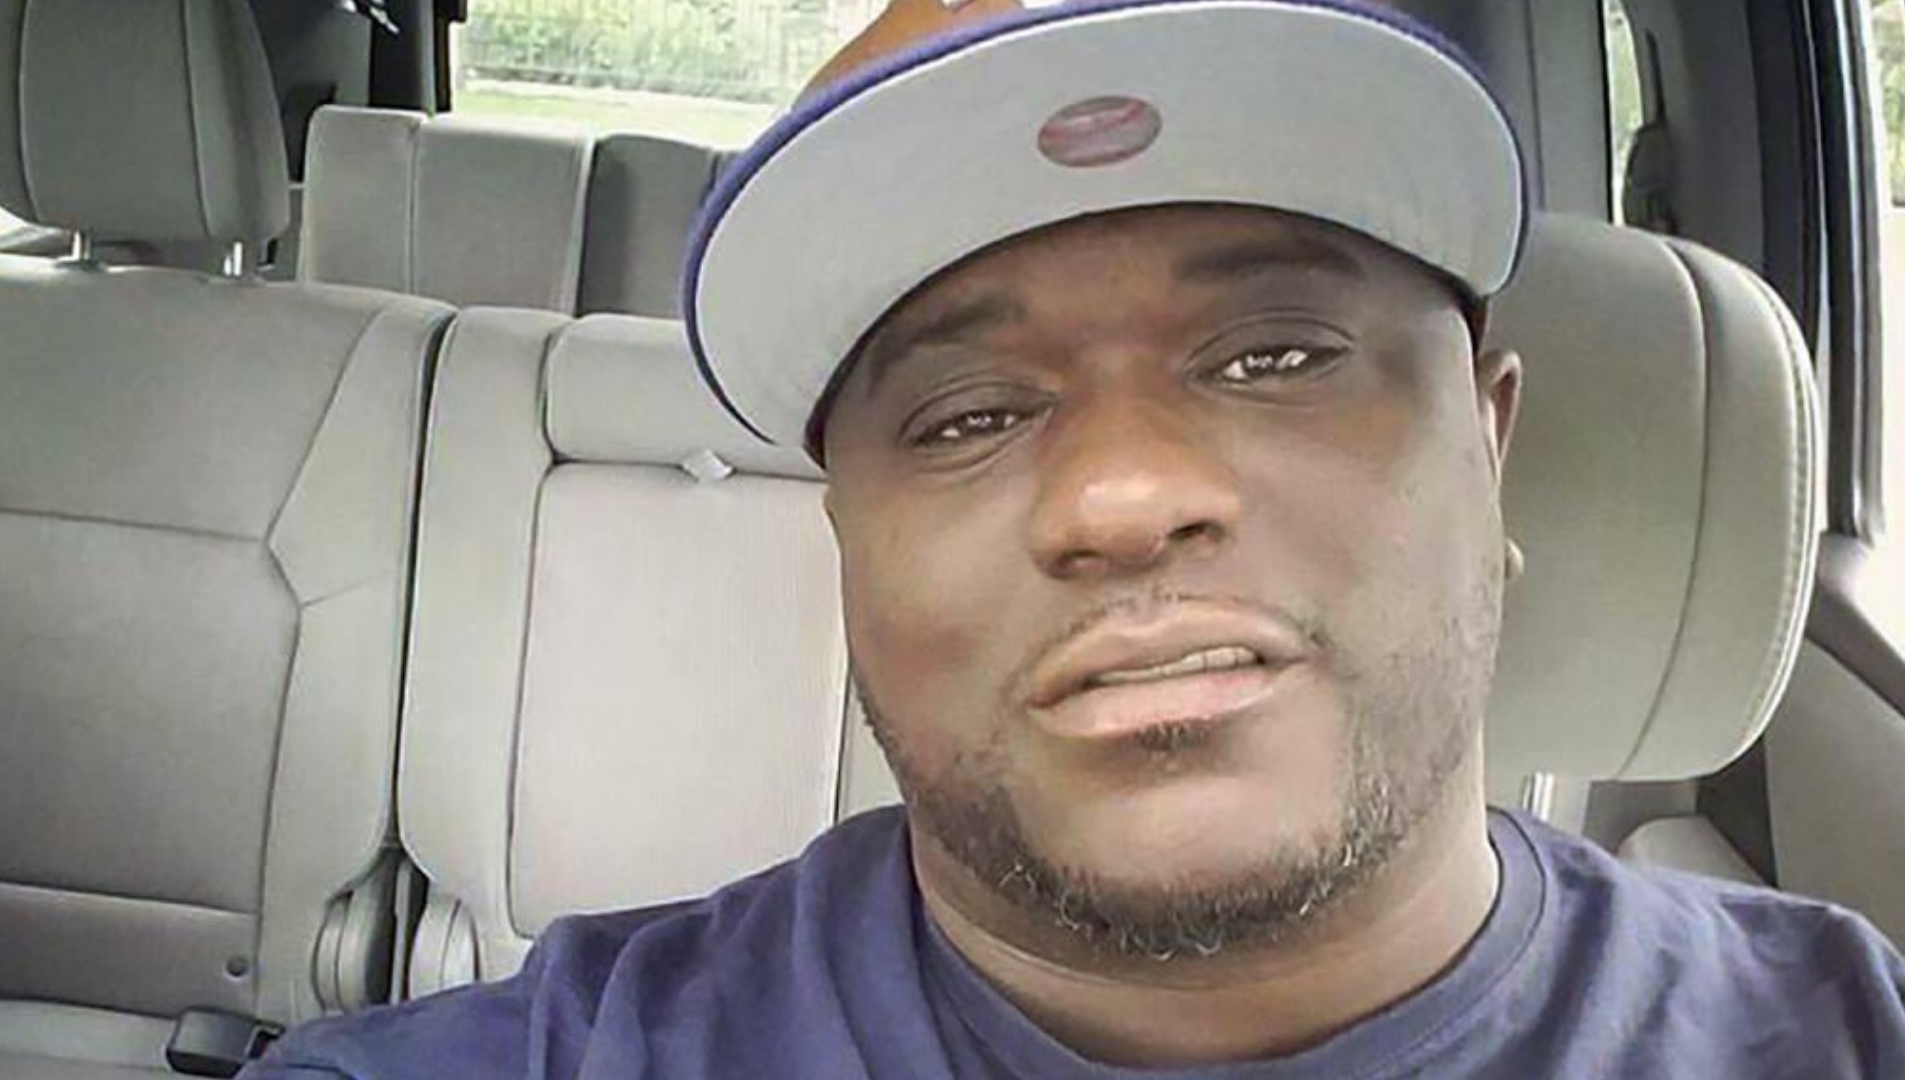 Black man in Texas says 'I can't breathe' during fatal arrest, video